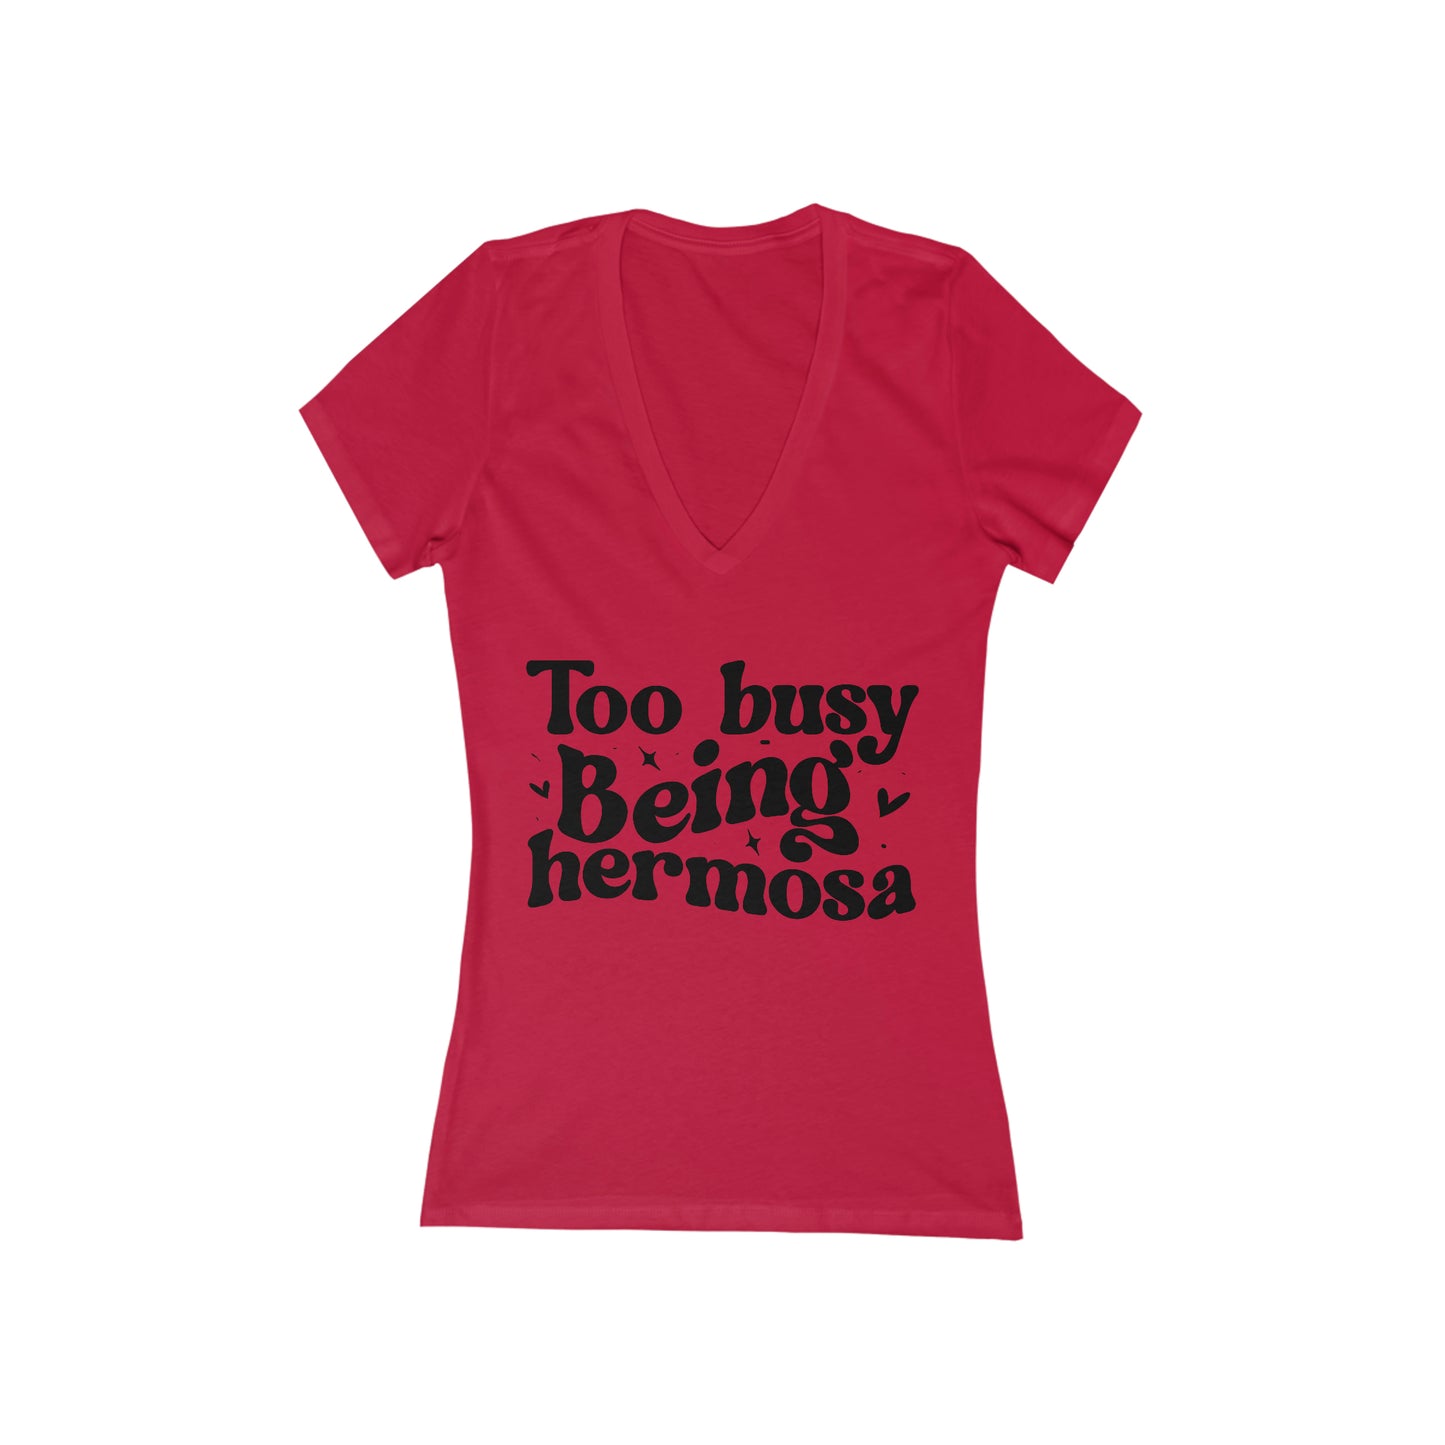 Too Busy Being Hermosa (Too Busy Being Beautiful) Women's Jersey Short Sleeve Deep V-Neck Tee